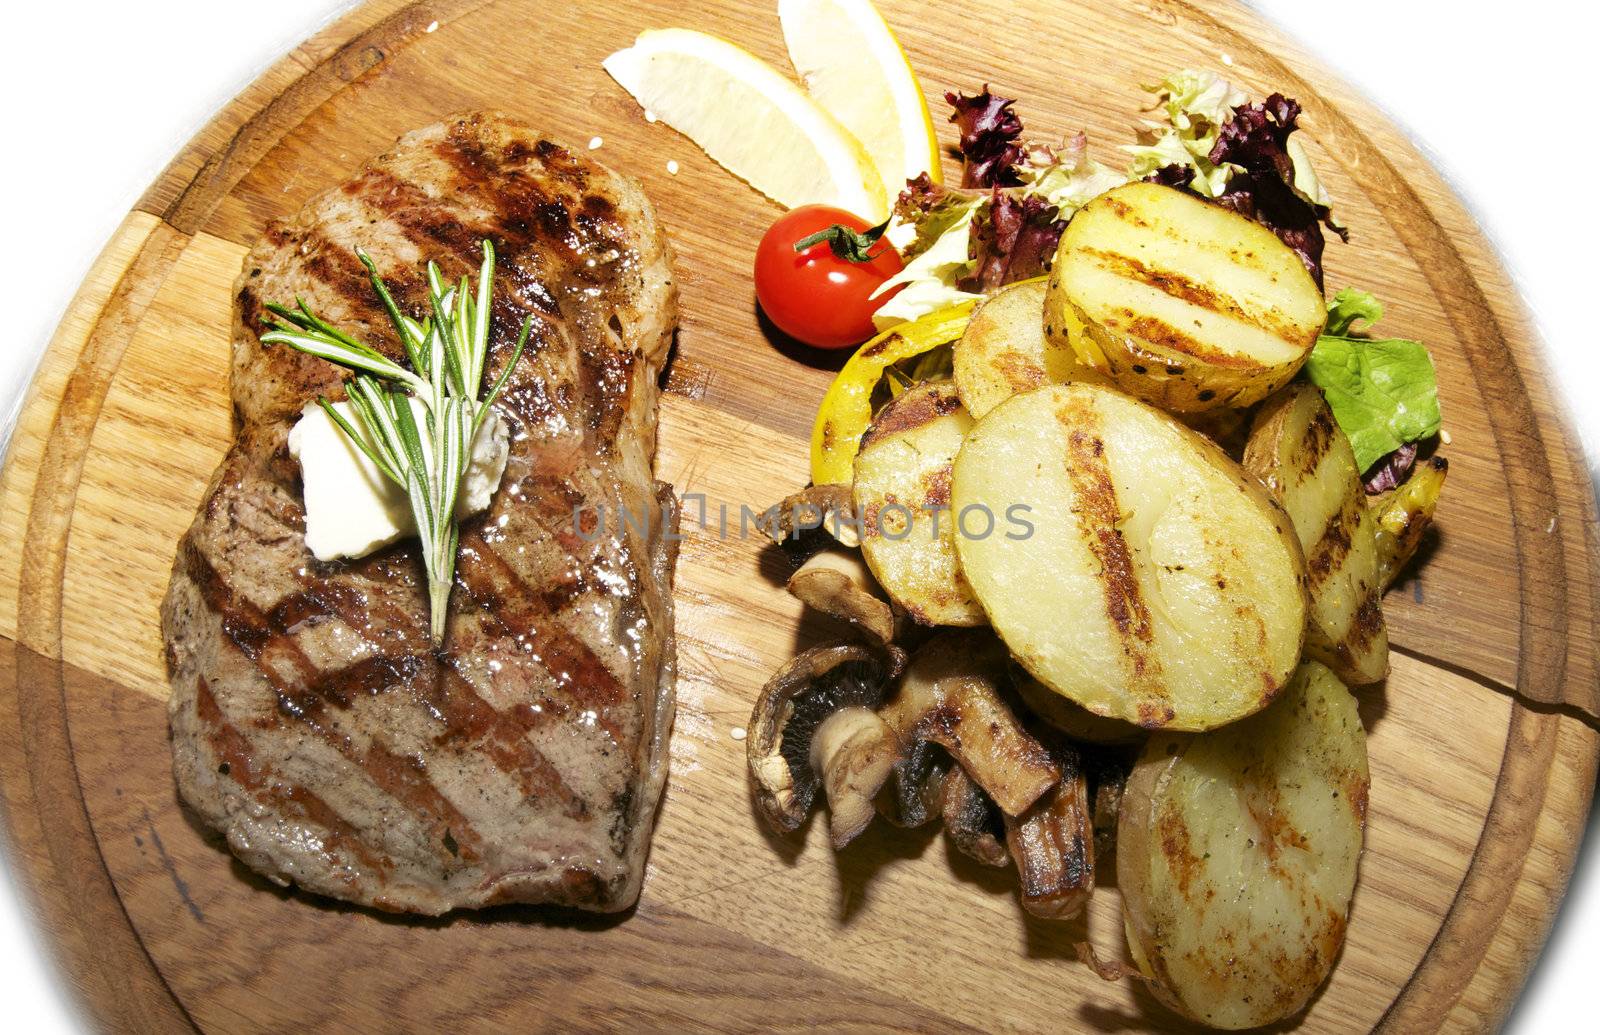 Steak and potatoes by Lester120